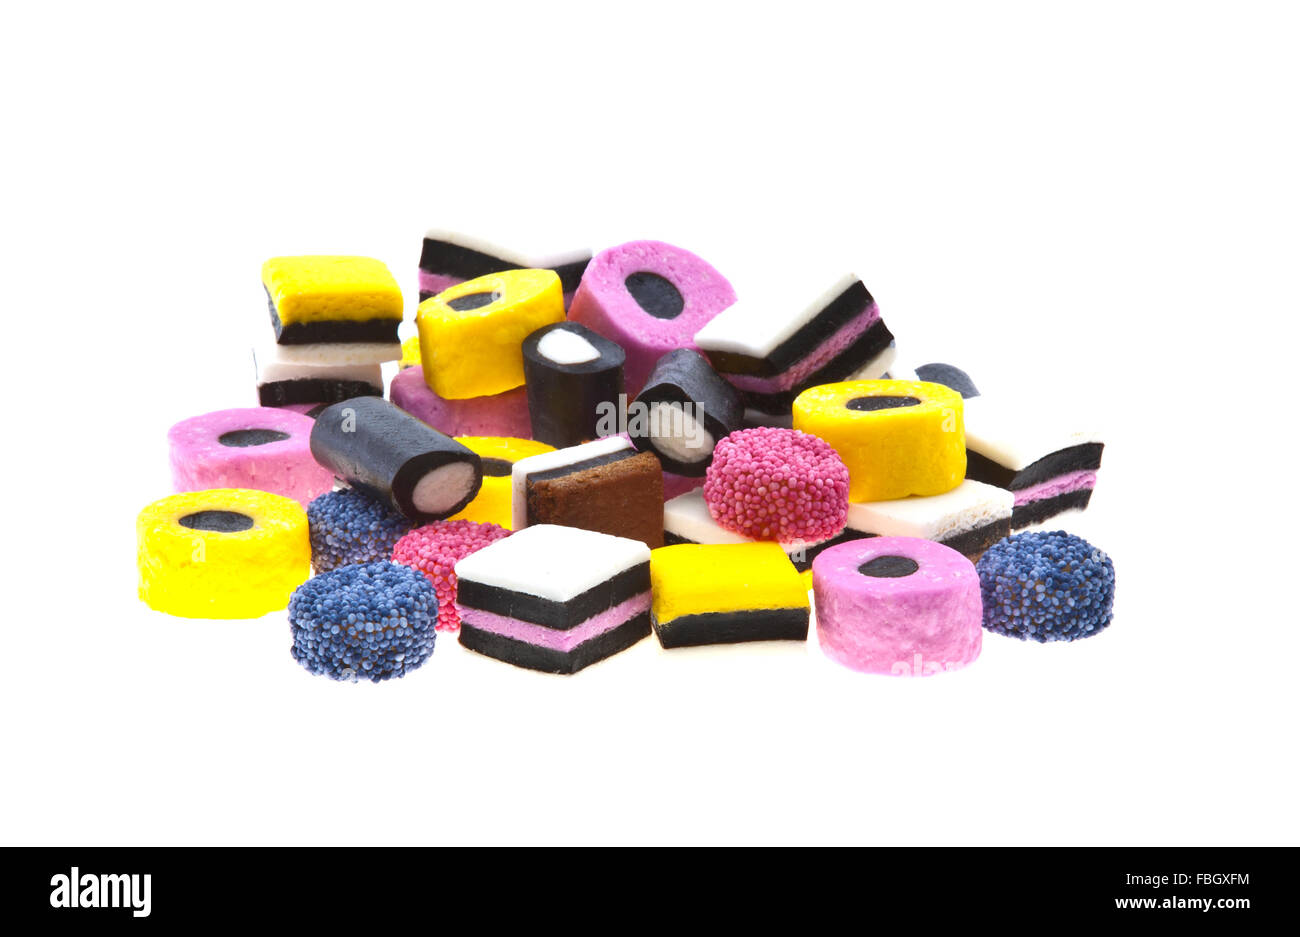 Selection of liquorice Allsorts sweets in colourful abstract stack design isolated over white background. Stock Photo